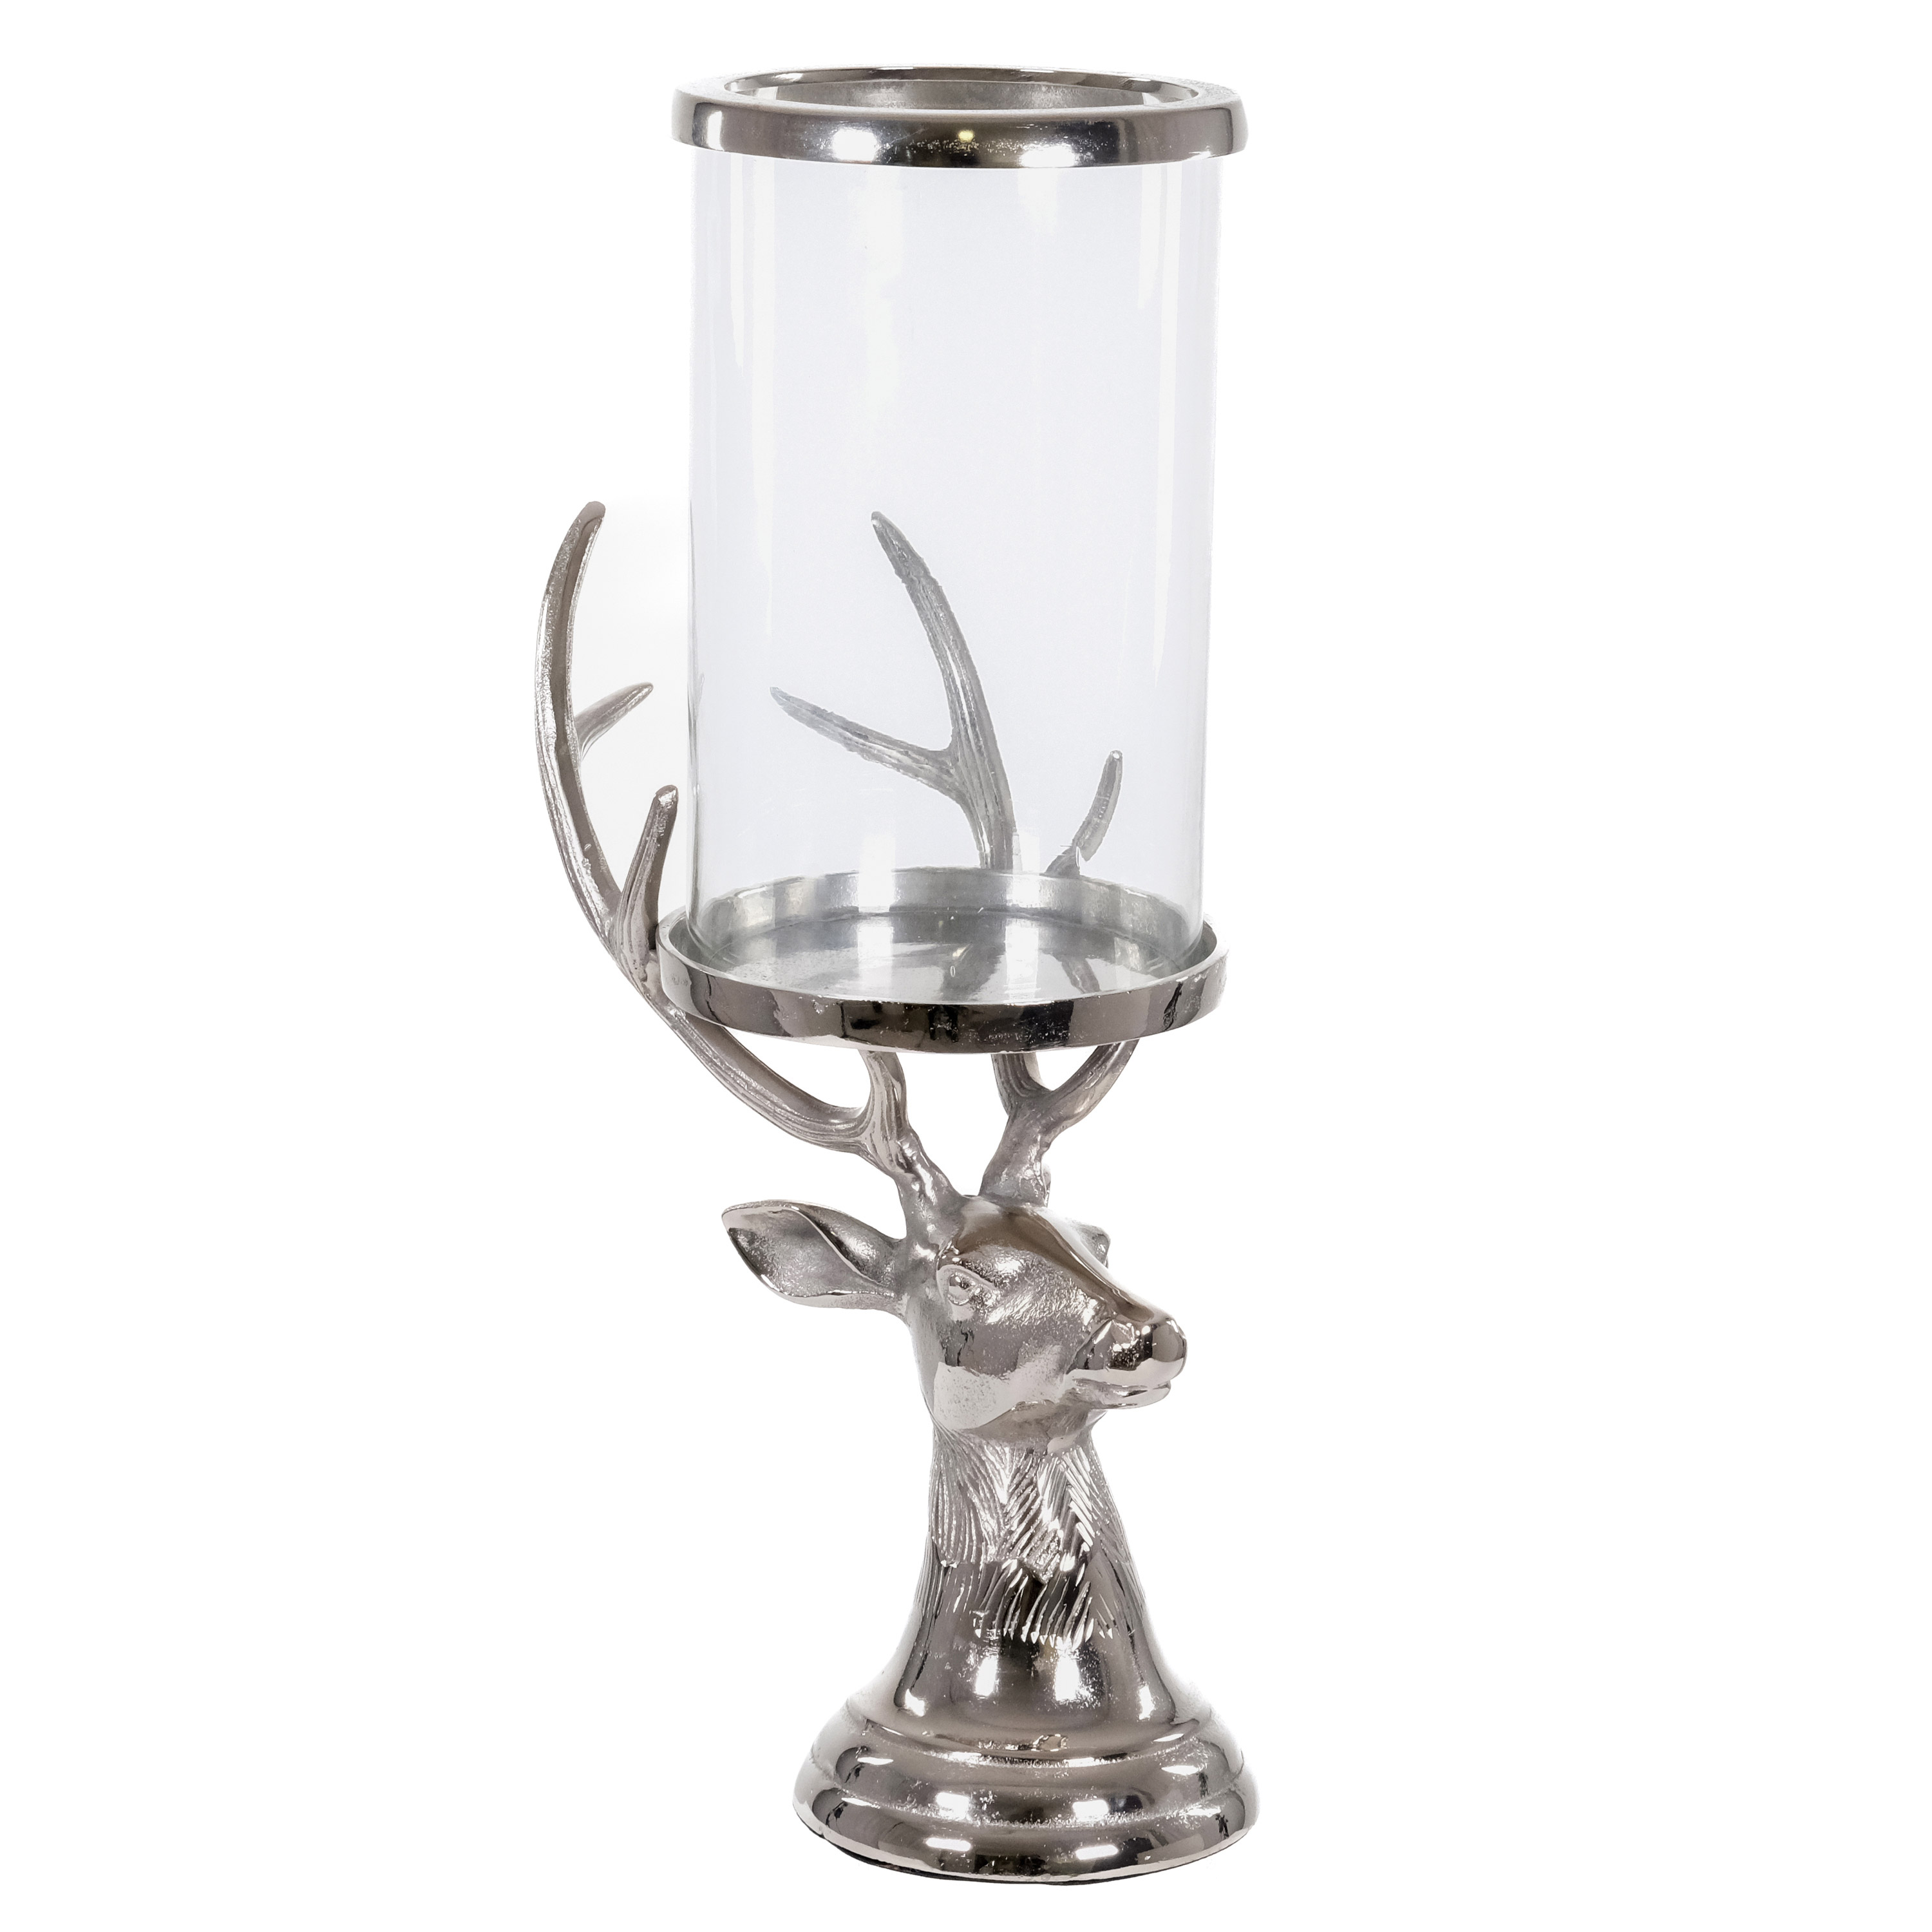 Silver Stag Candle Hurricane Lantern - Image 1